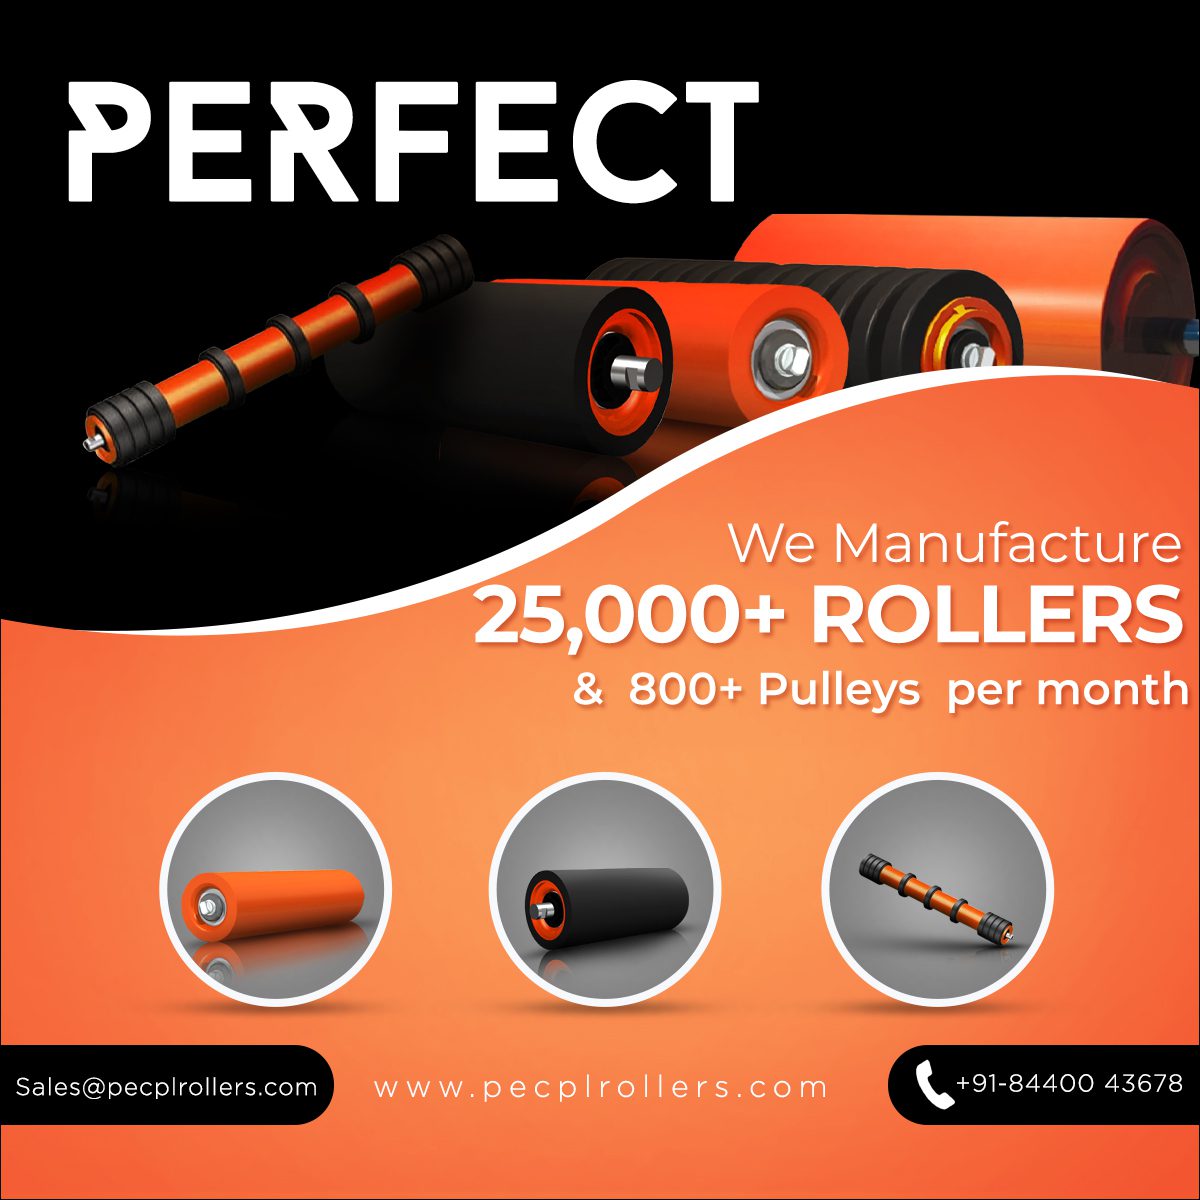 We are manufacturing 25,000+ Rollers per month and 800+ Pulleys per month.